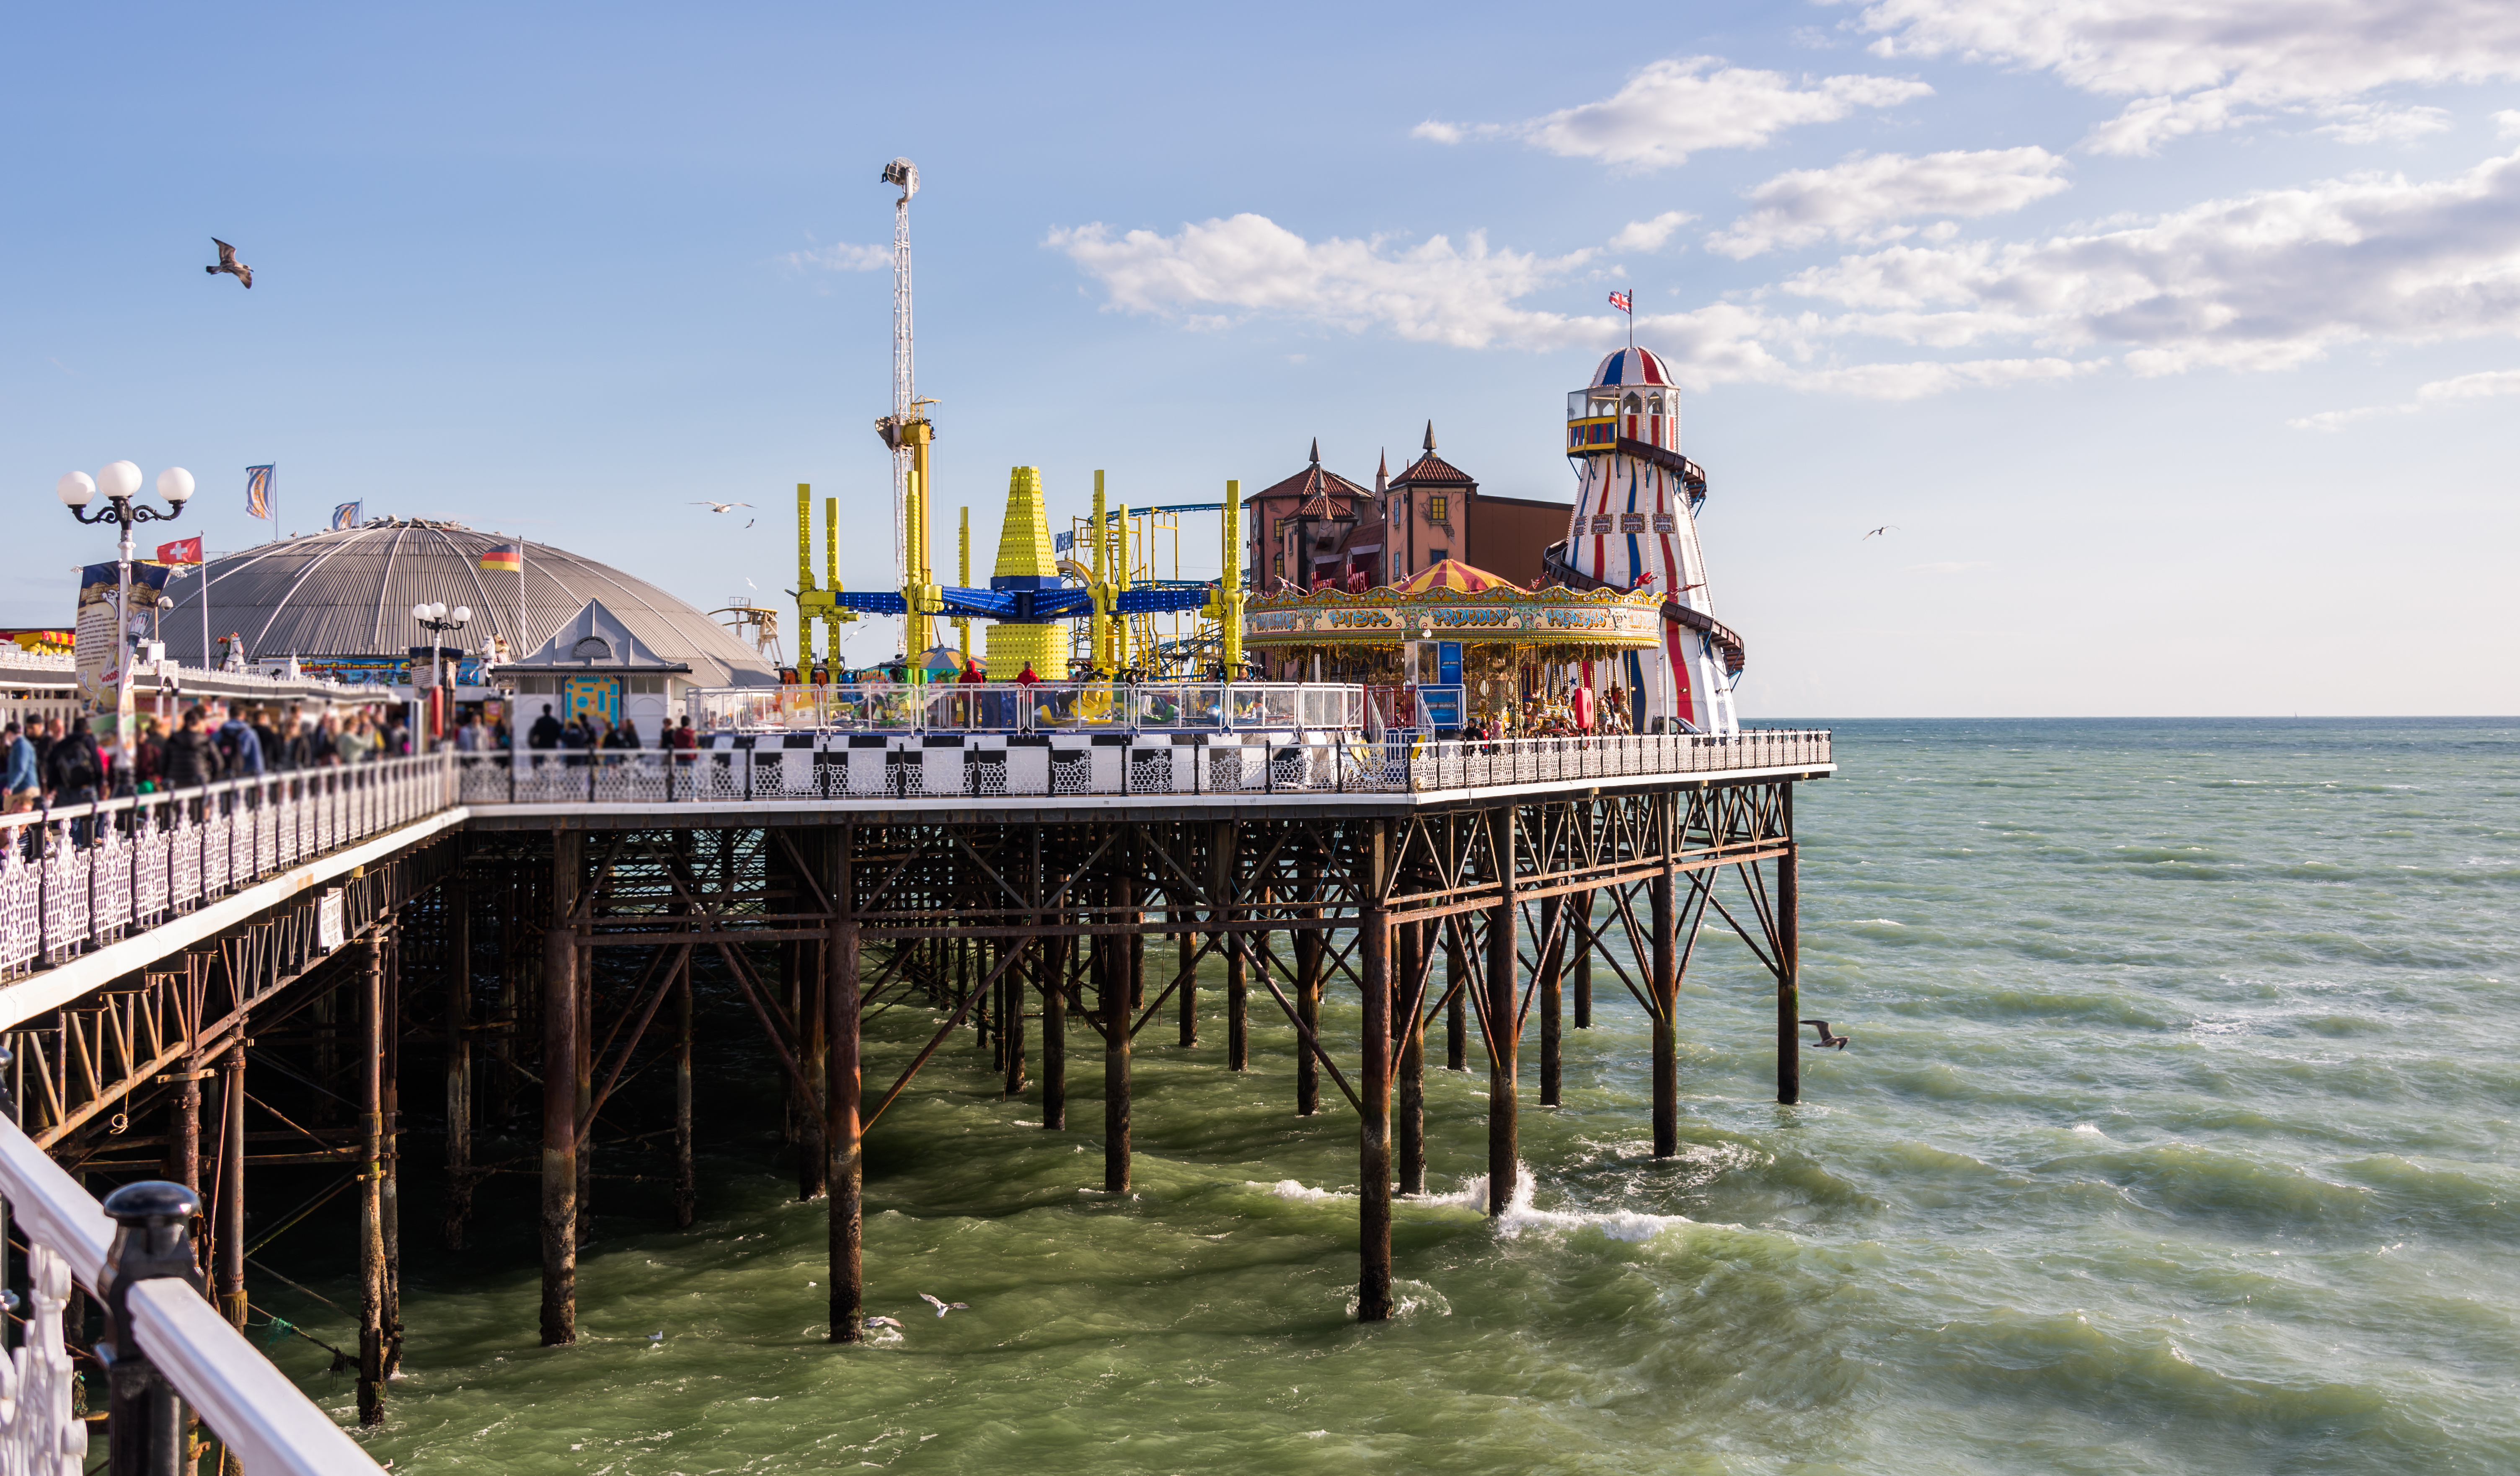 9 of the most picturesque piers for a wheelchair-friendly beach day